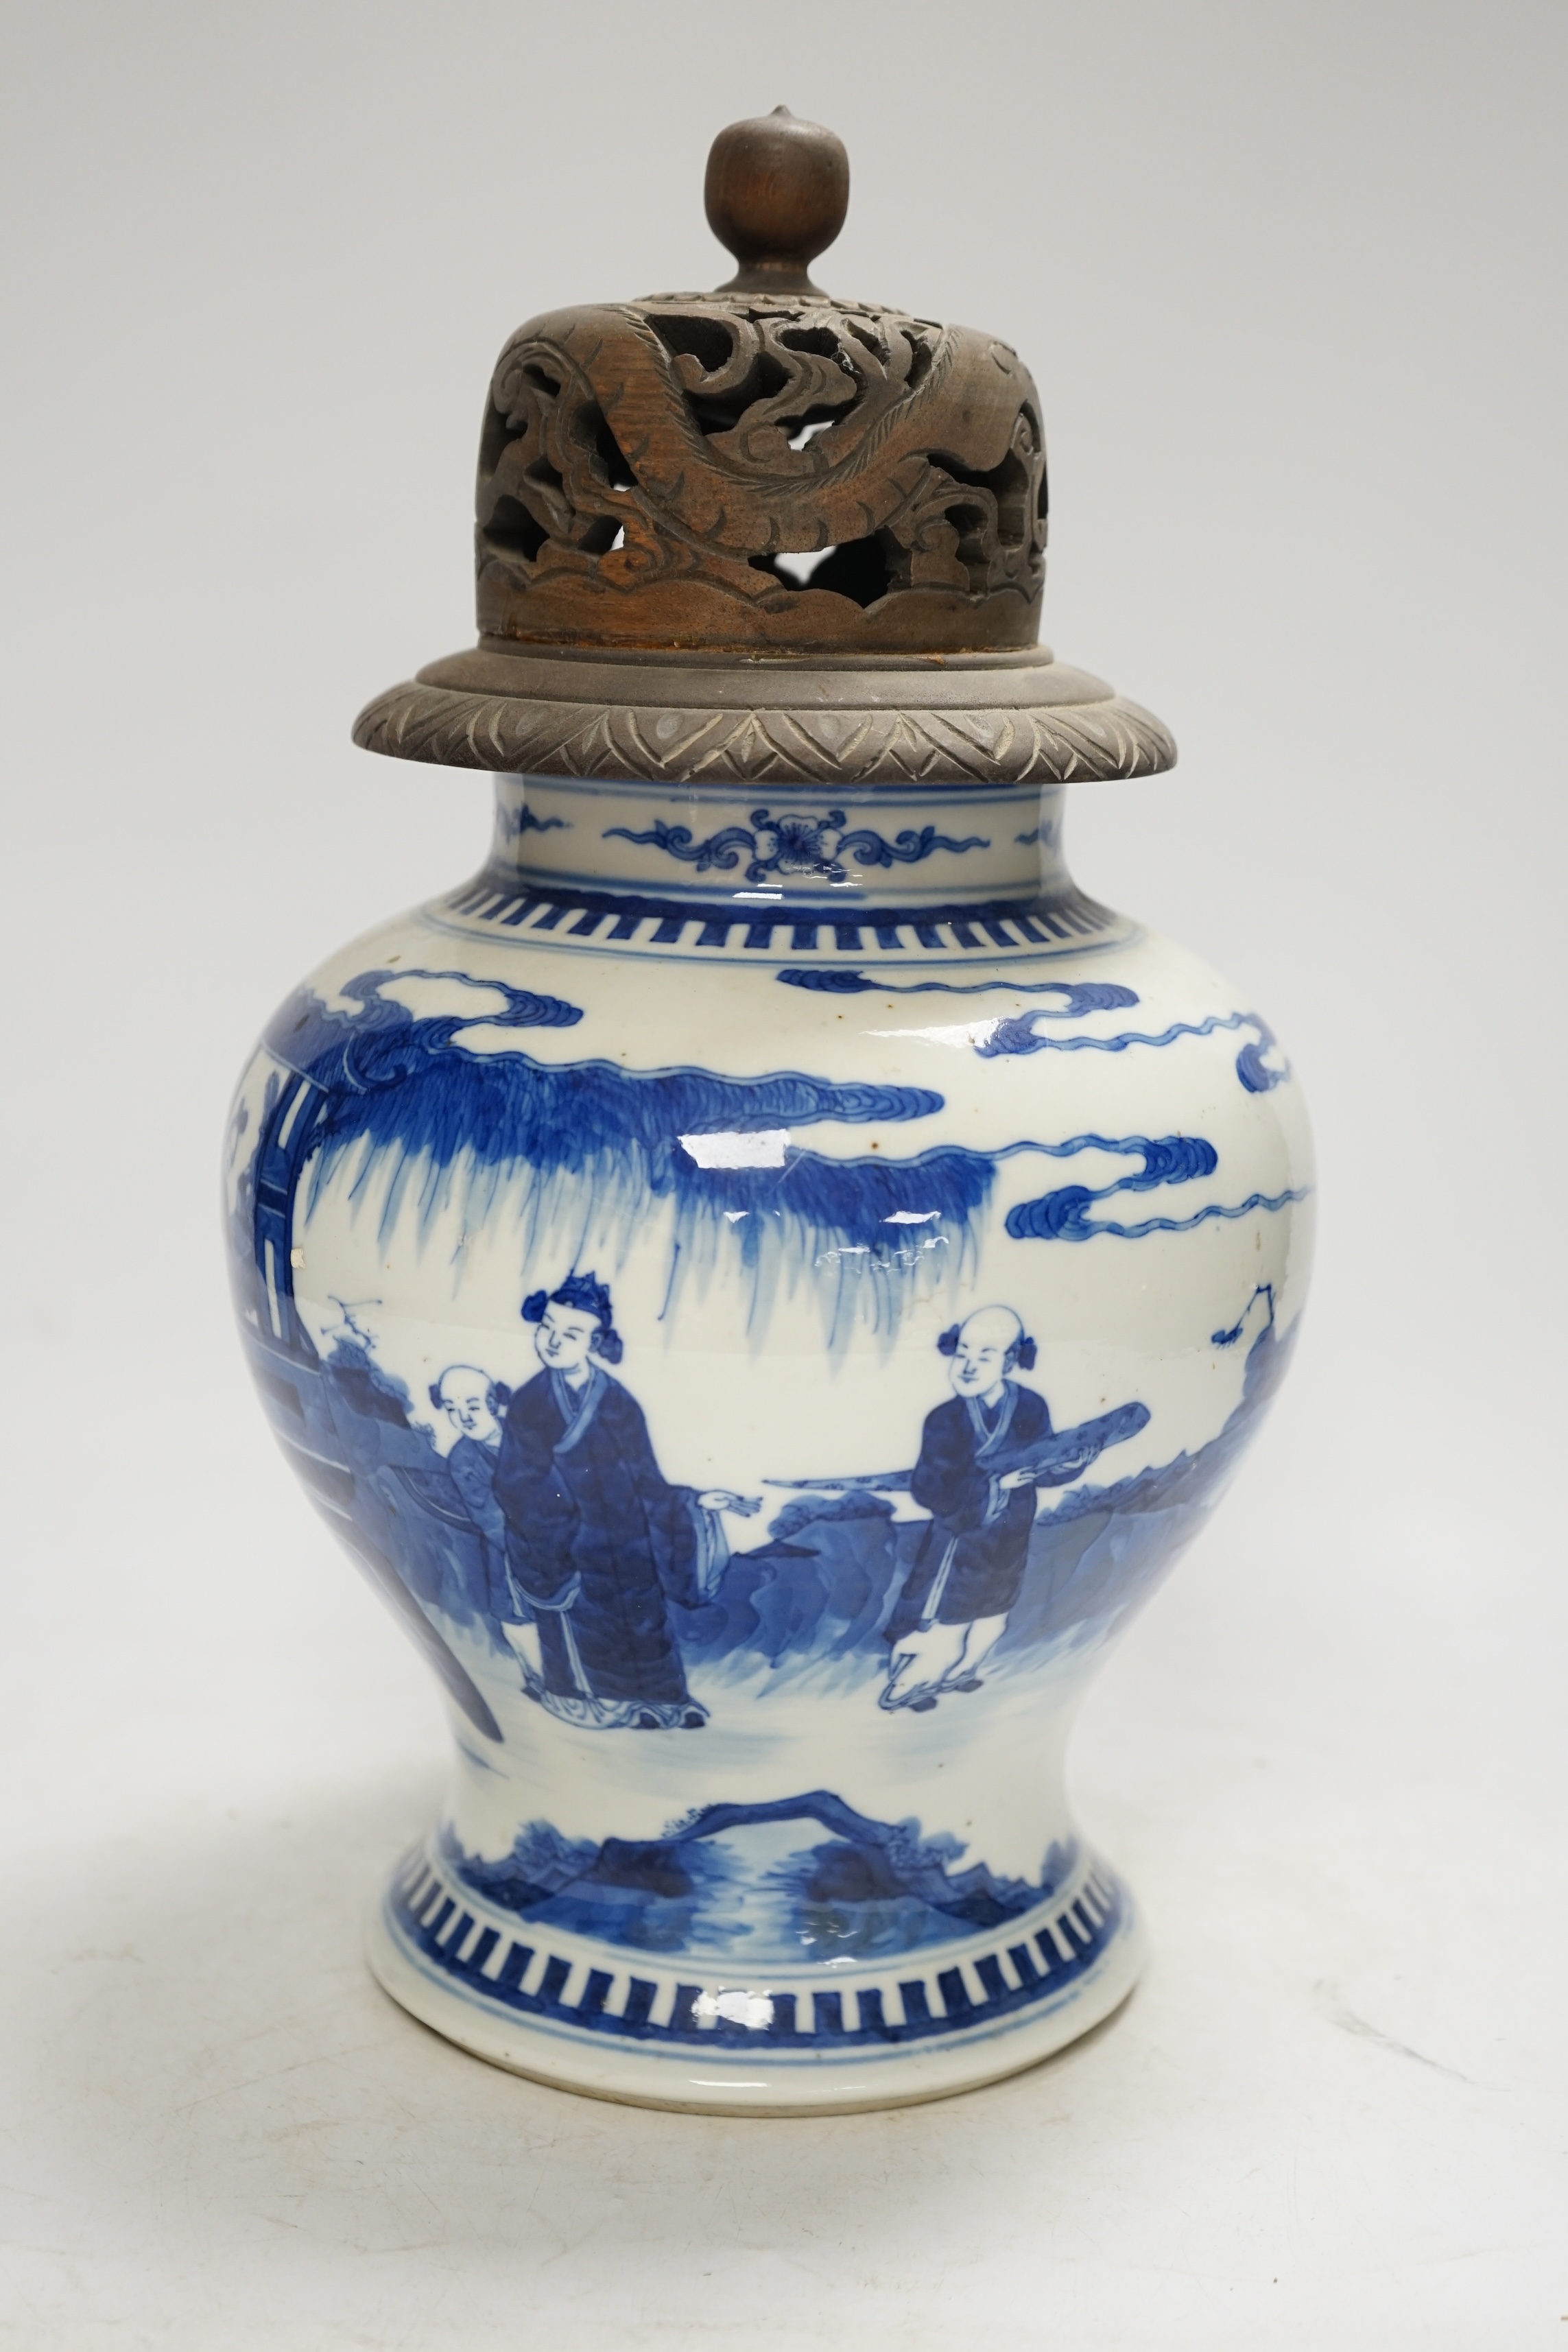 A 19th century Chinese blue and white baluster jar, painted with a scene from the Romance of the Western chamber, wood cover, 34cm. Condition - good